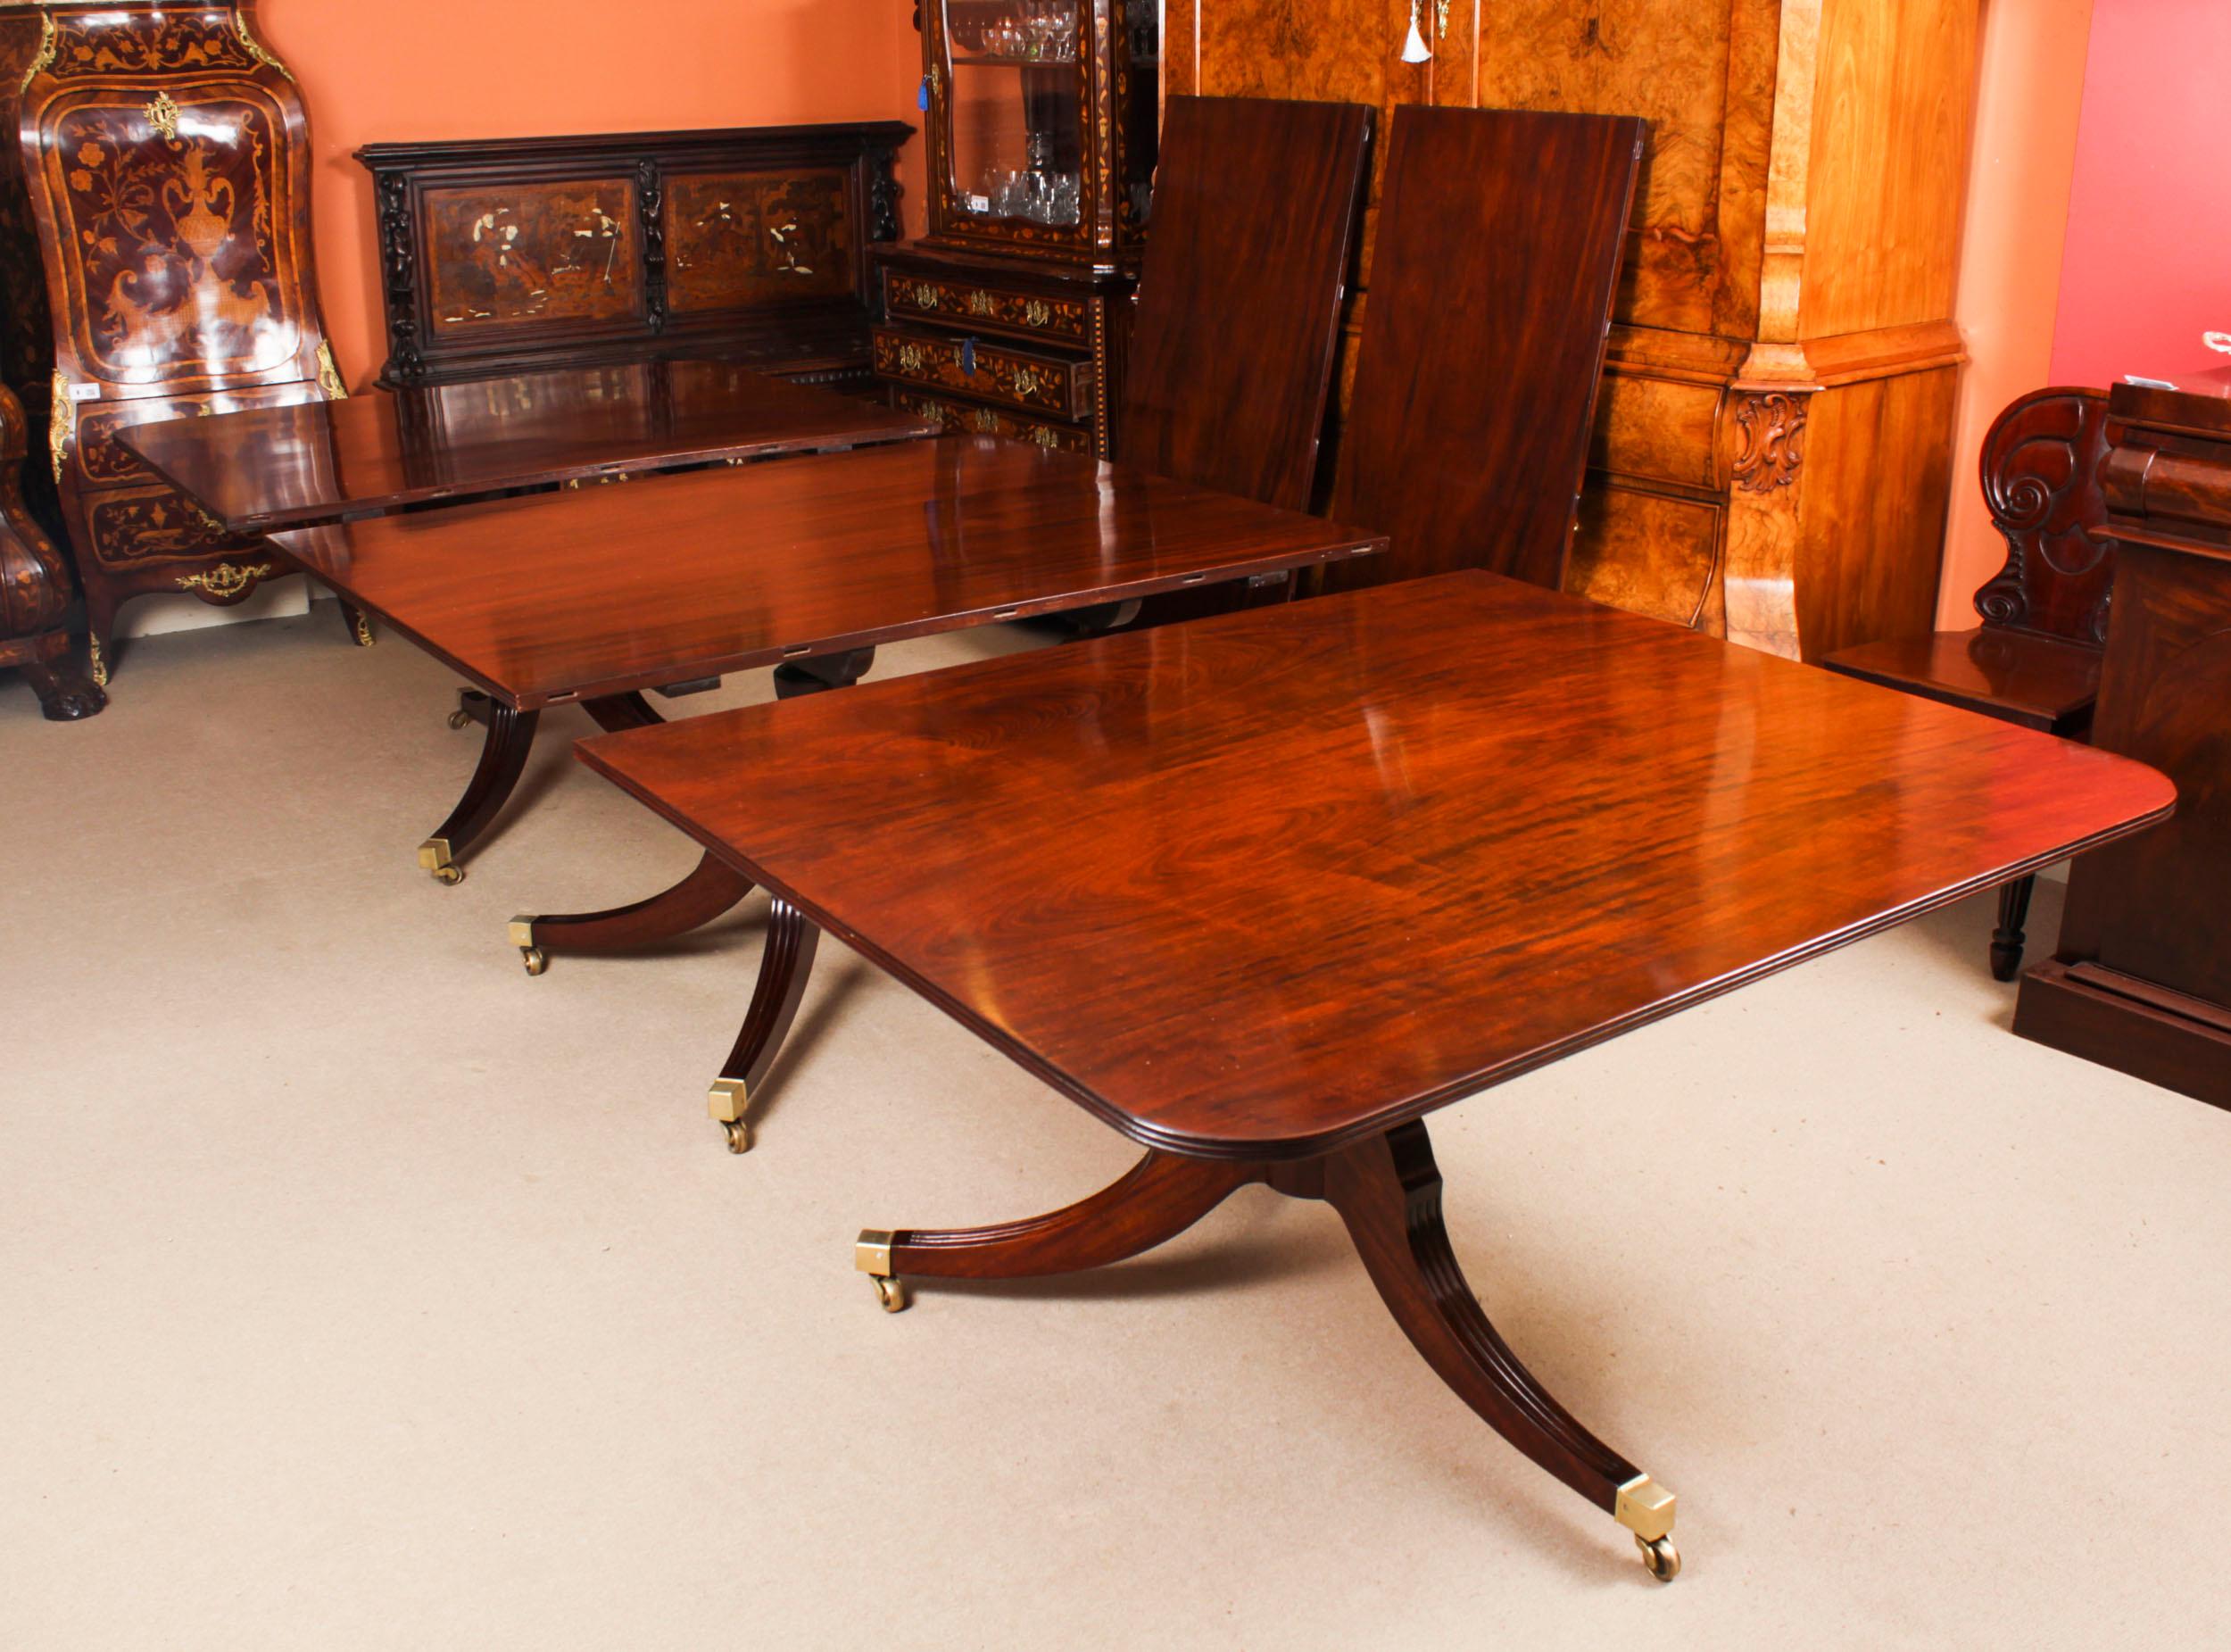 Antique 14ft Regency Revival Triple Pillar Dining Table & 14 Chairs 19th Century For Sale 2